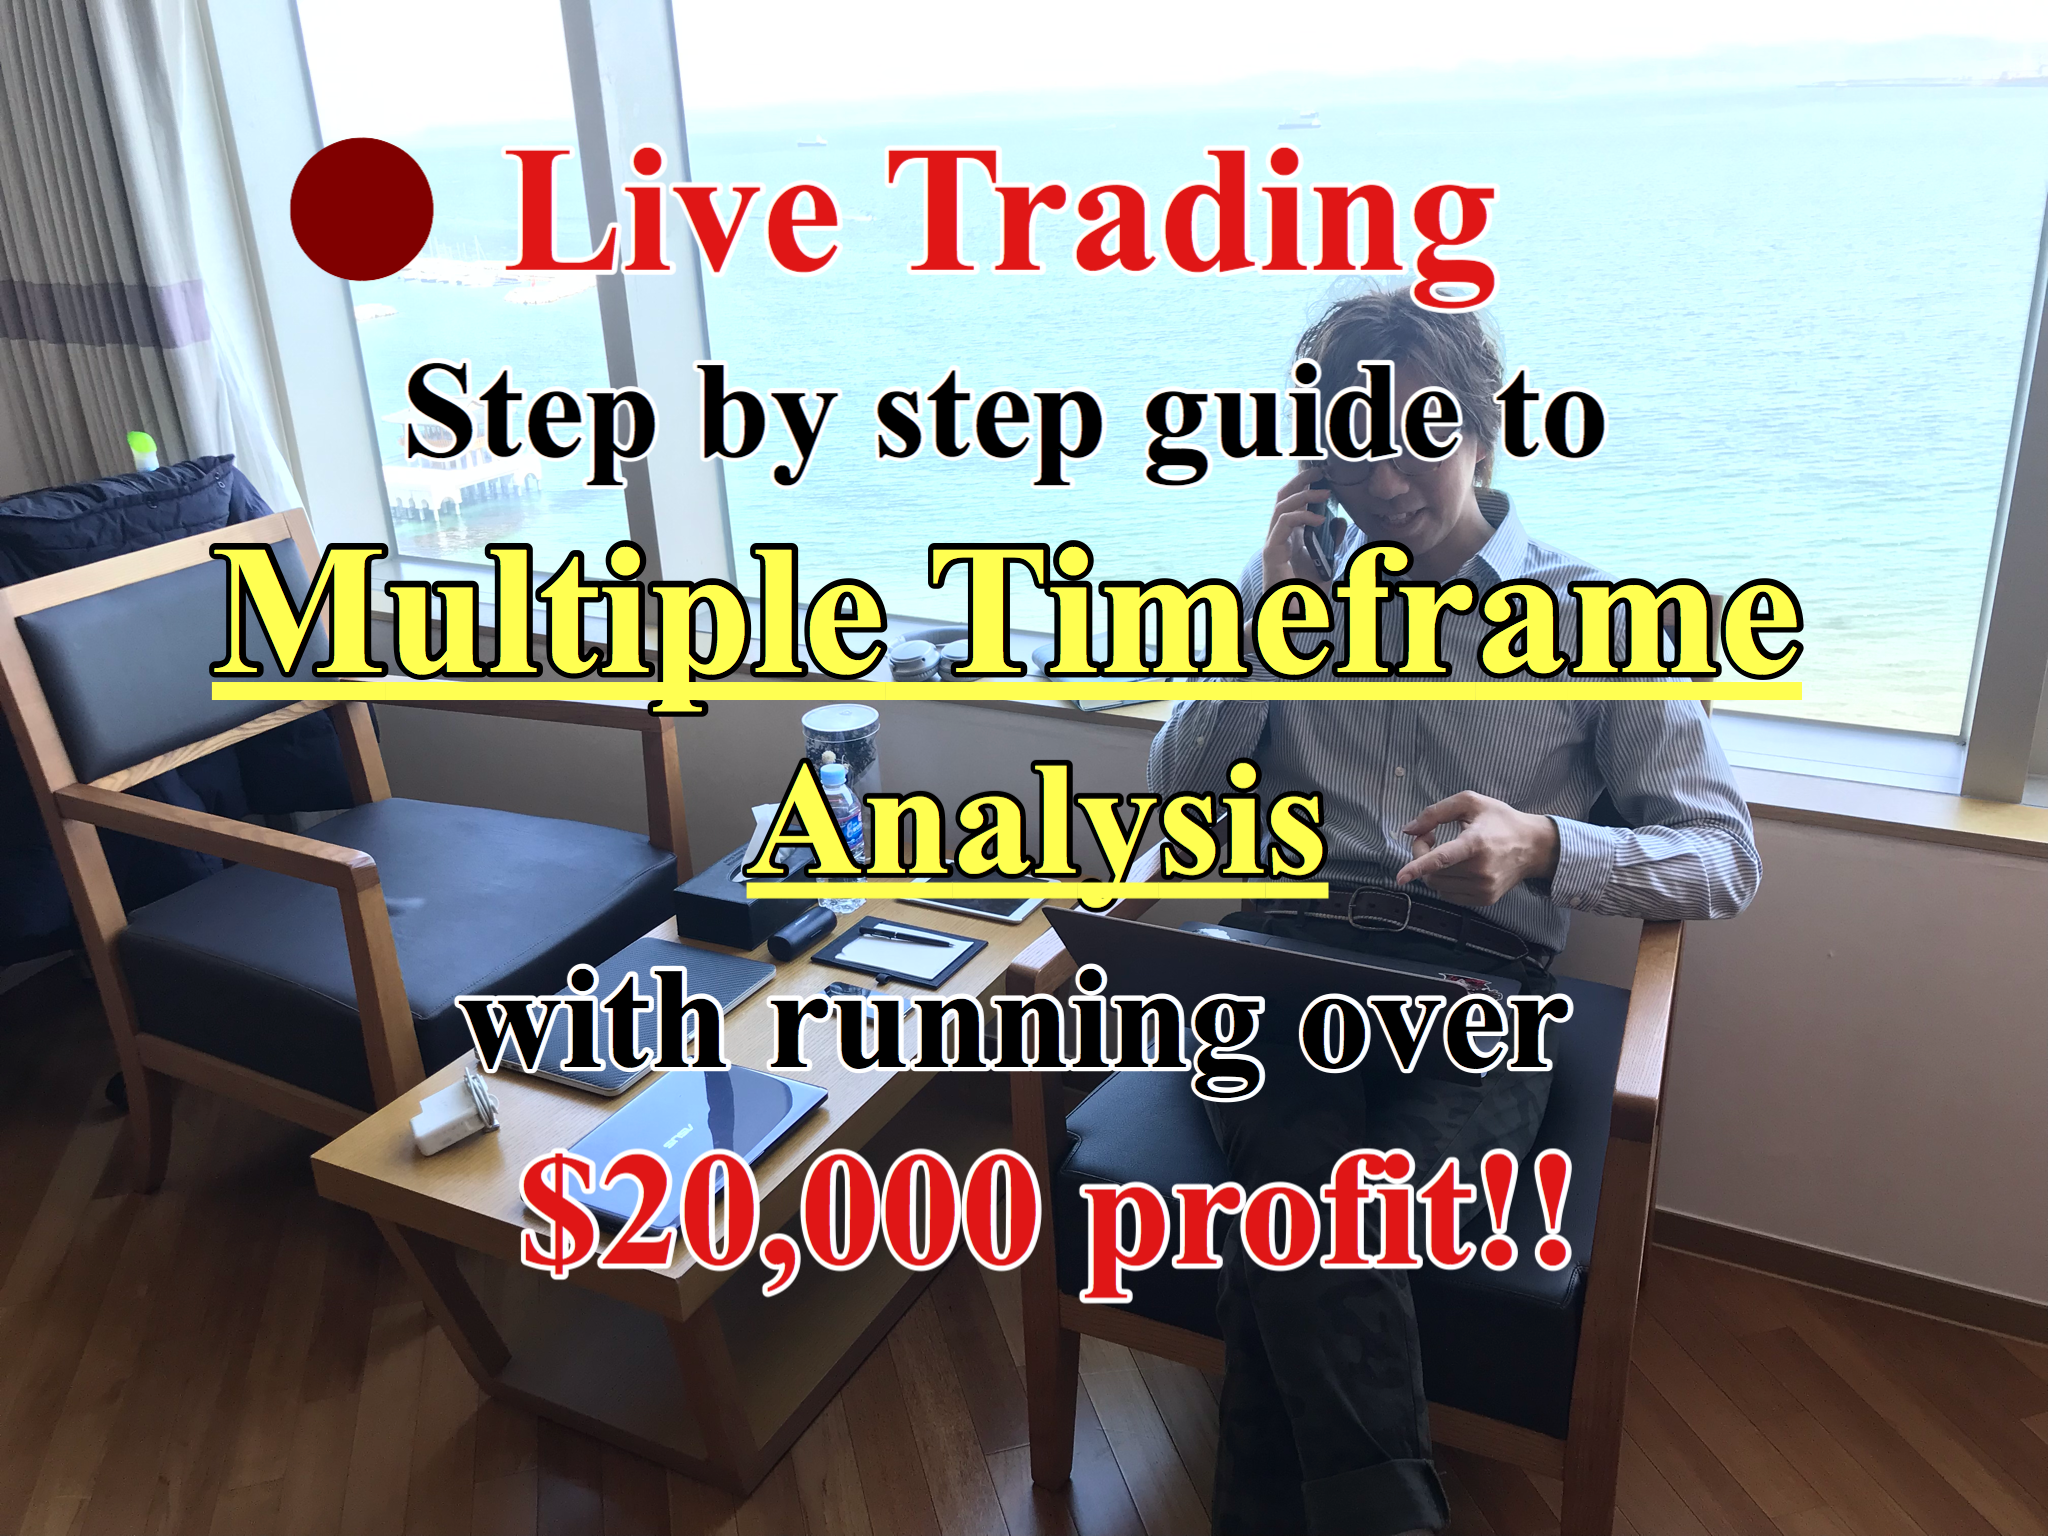 Step by step guide to Multiple Timeframe Analysis with running over $20,000 profit!